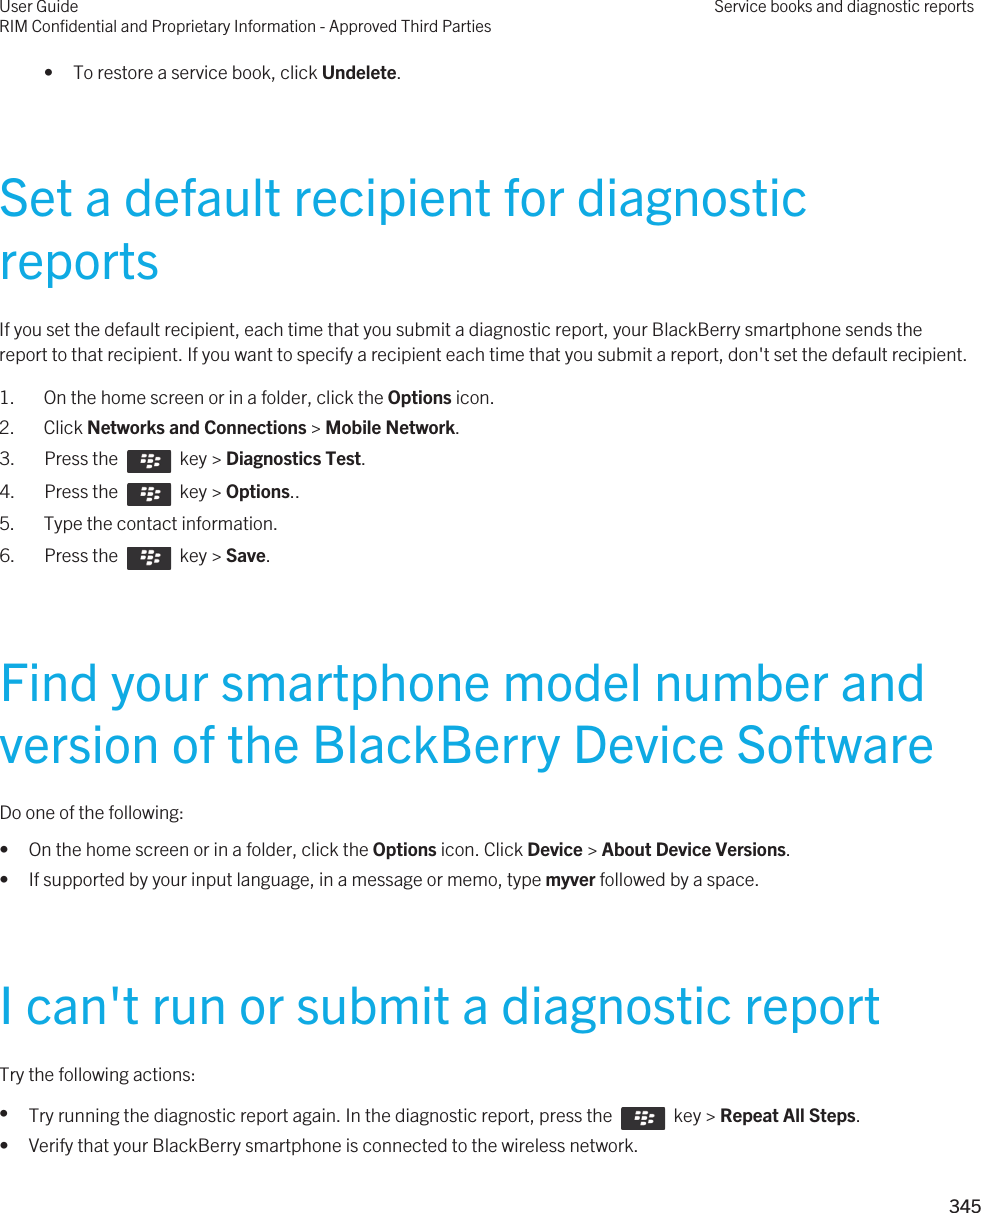 • To restore a service book, click Undelete.Set a default recipient for diagnostic reportsIf you set the default recipient, each time that you submit a diagnostic report, your BlackBerry smartphone sends the report to that recipient. If you want to specify a recipient each time that you submit a report, don&apos;t set the default recipient.1. On the home screen or in a folder, click the Options icon.2. Click Networks and Connections &gt; Mobile Network.3.  Press the    key &gt; Diagnostics Test. 4.  Press the    key &gt; Options.. 5. Type the contact information.6.  Press the    key &gt; Save. Find your smartphone model number and version of the BlackBerry Device SoftwareDo one of the following:• On the home screen or in a folder, click the Options icon. Click Device &gt; About Device Versions.• If supported by your input language, in a message or memo, type myver followed by a space.I can&apos;t run or submit a diagnostic reportTry the following actions:•Try running the diagnostic report again. In the diagnostic report, press the    key &gt; Repeat All Steps.• Verify that your BlackBerry smartphone is connected to the wireless network.User GuideRIM Confidential and Proprietary Information - Approved Third PartiesService books and diagnostic reports345 